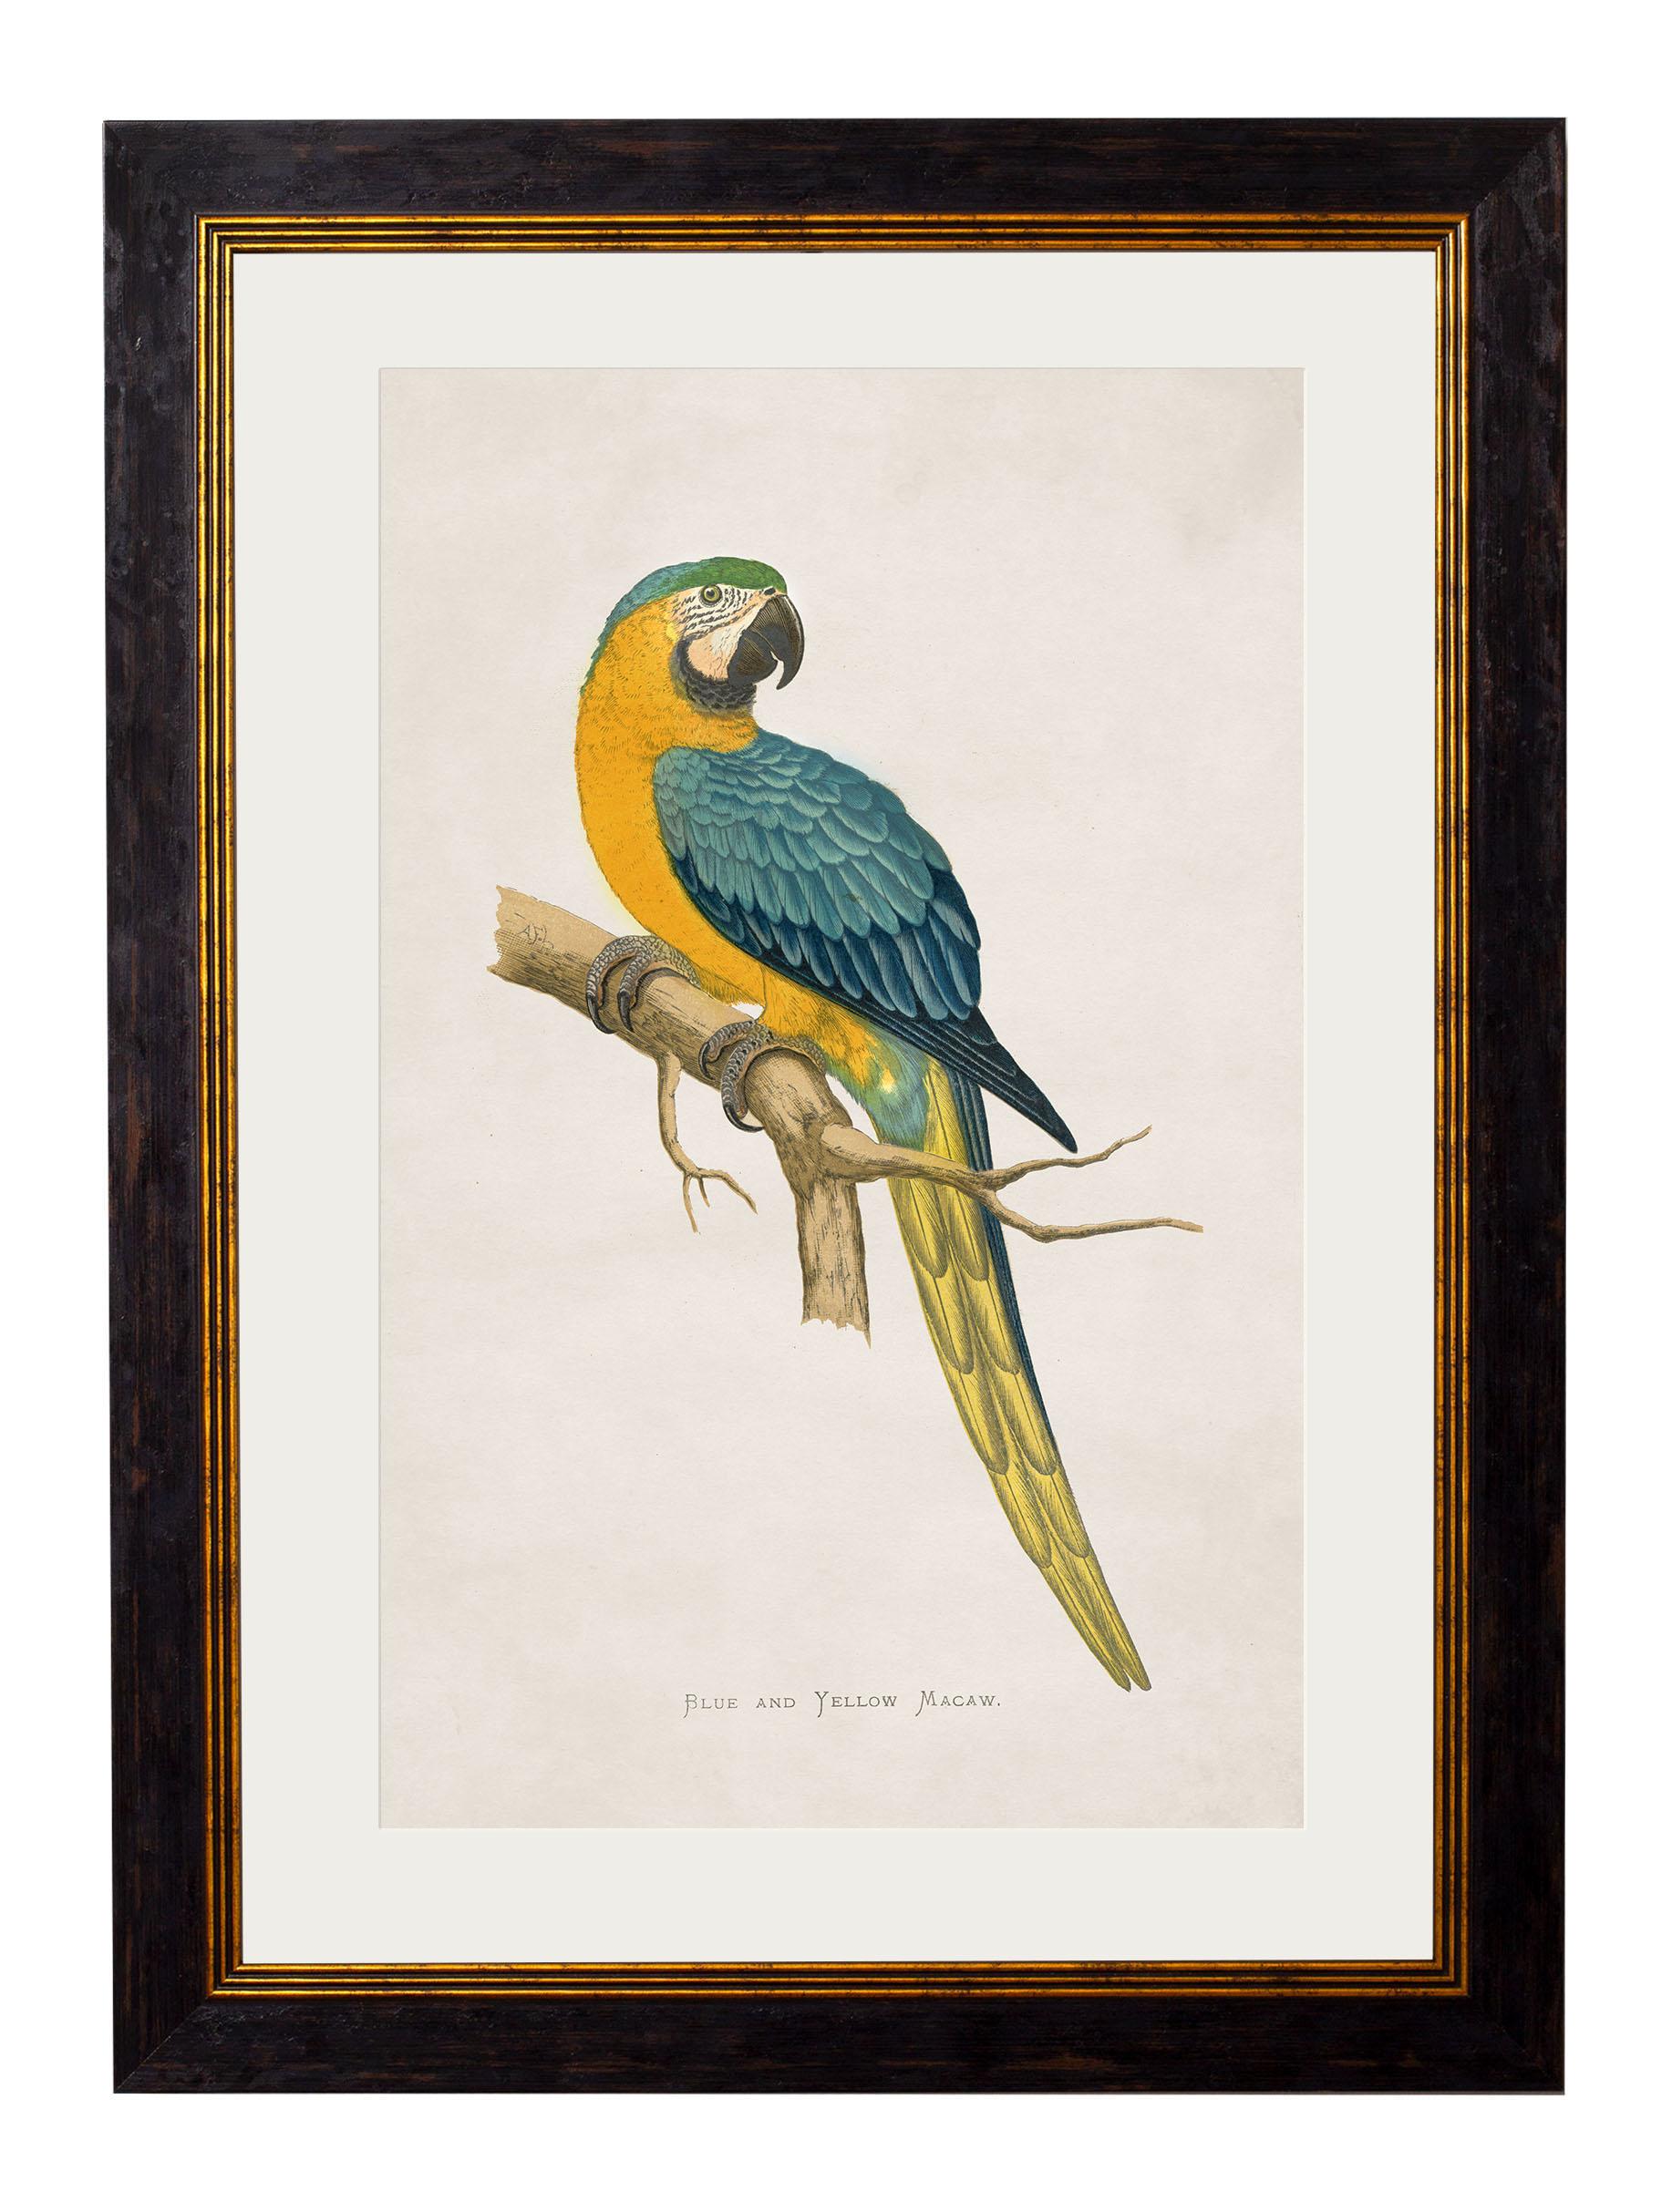 These are a set of FOUR digitally remastered prints of Macaws, hand coloured framed prints, originally from Circa 1864.

Prints of this style were originally printed in black and white and then hand painted over the top to give them bright vibrant